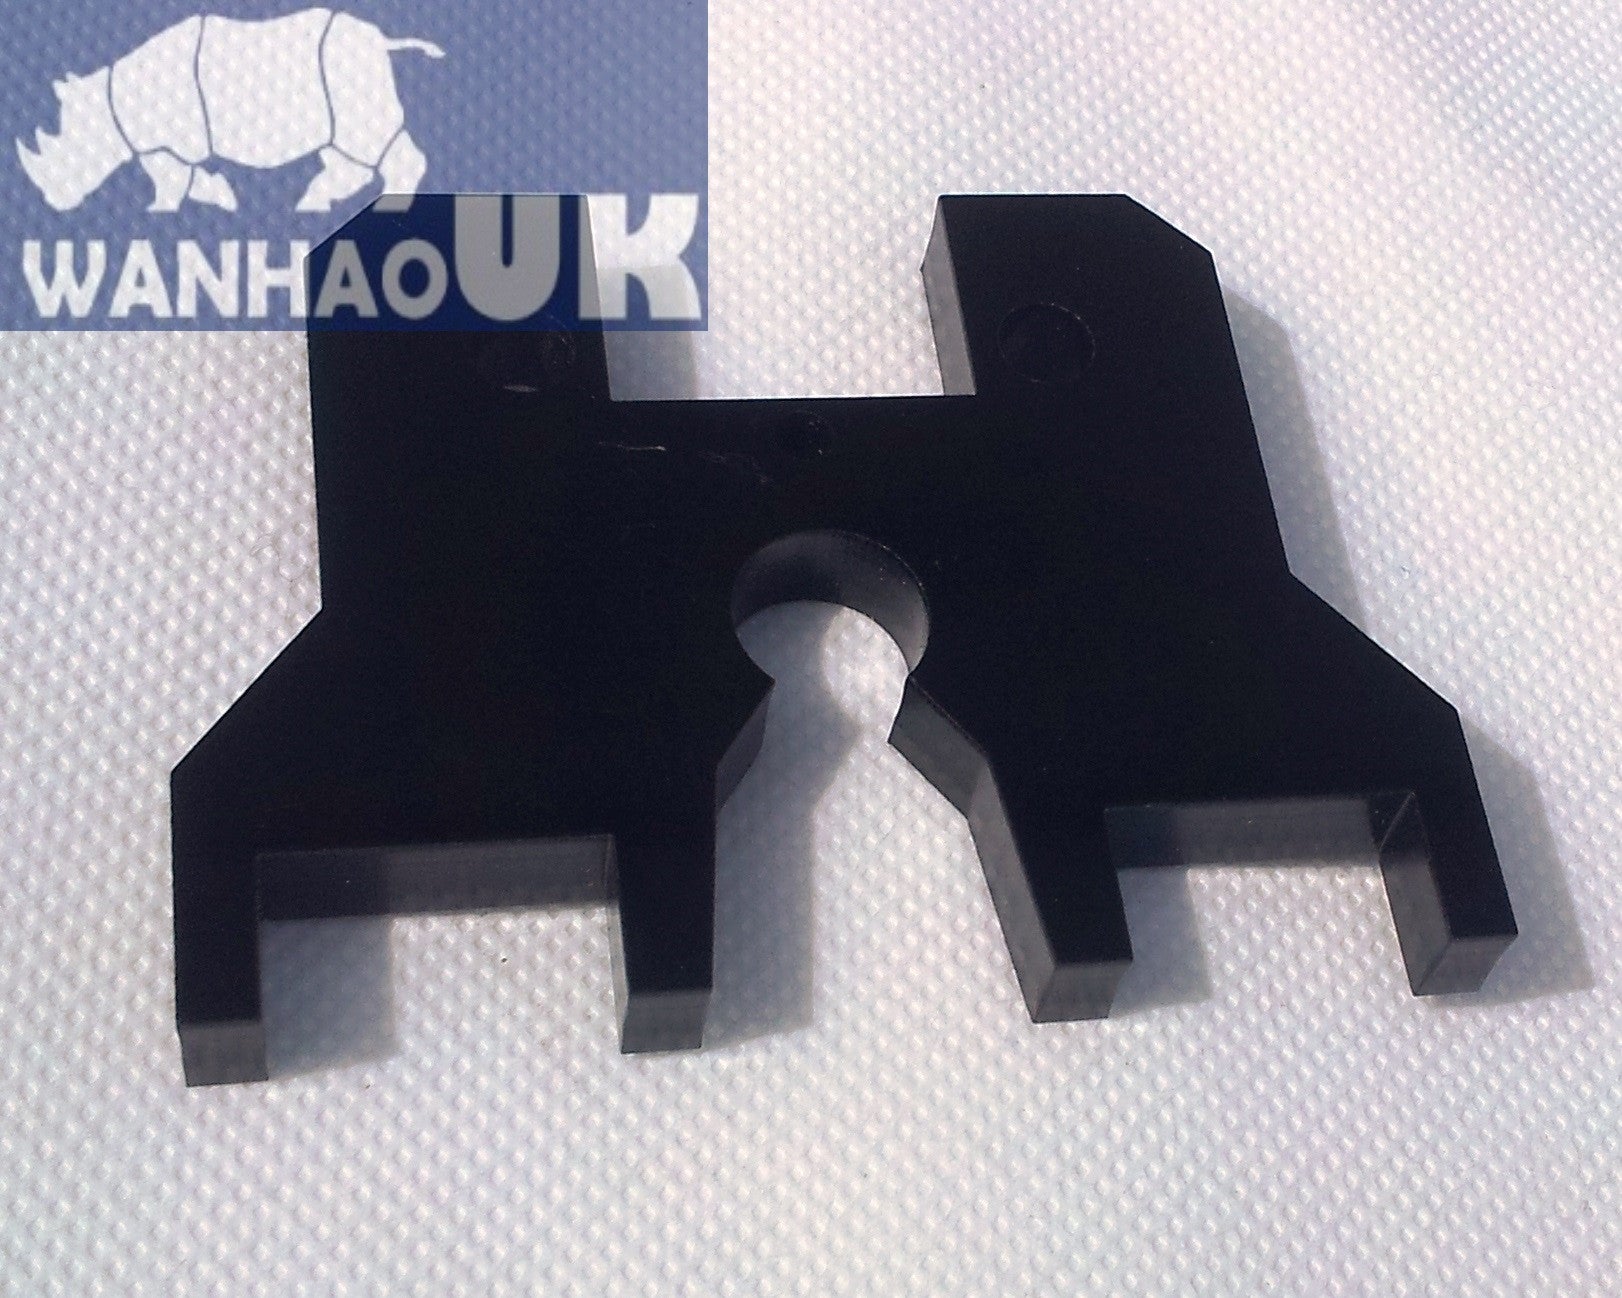 D4 MK9 Extruder Top Plate Cover